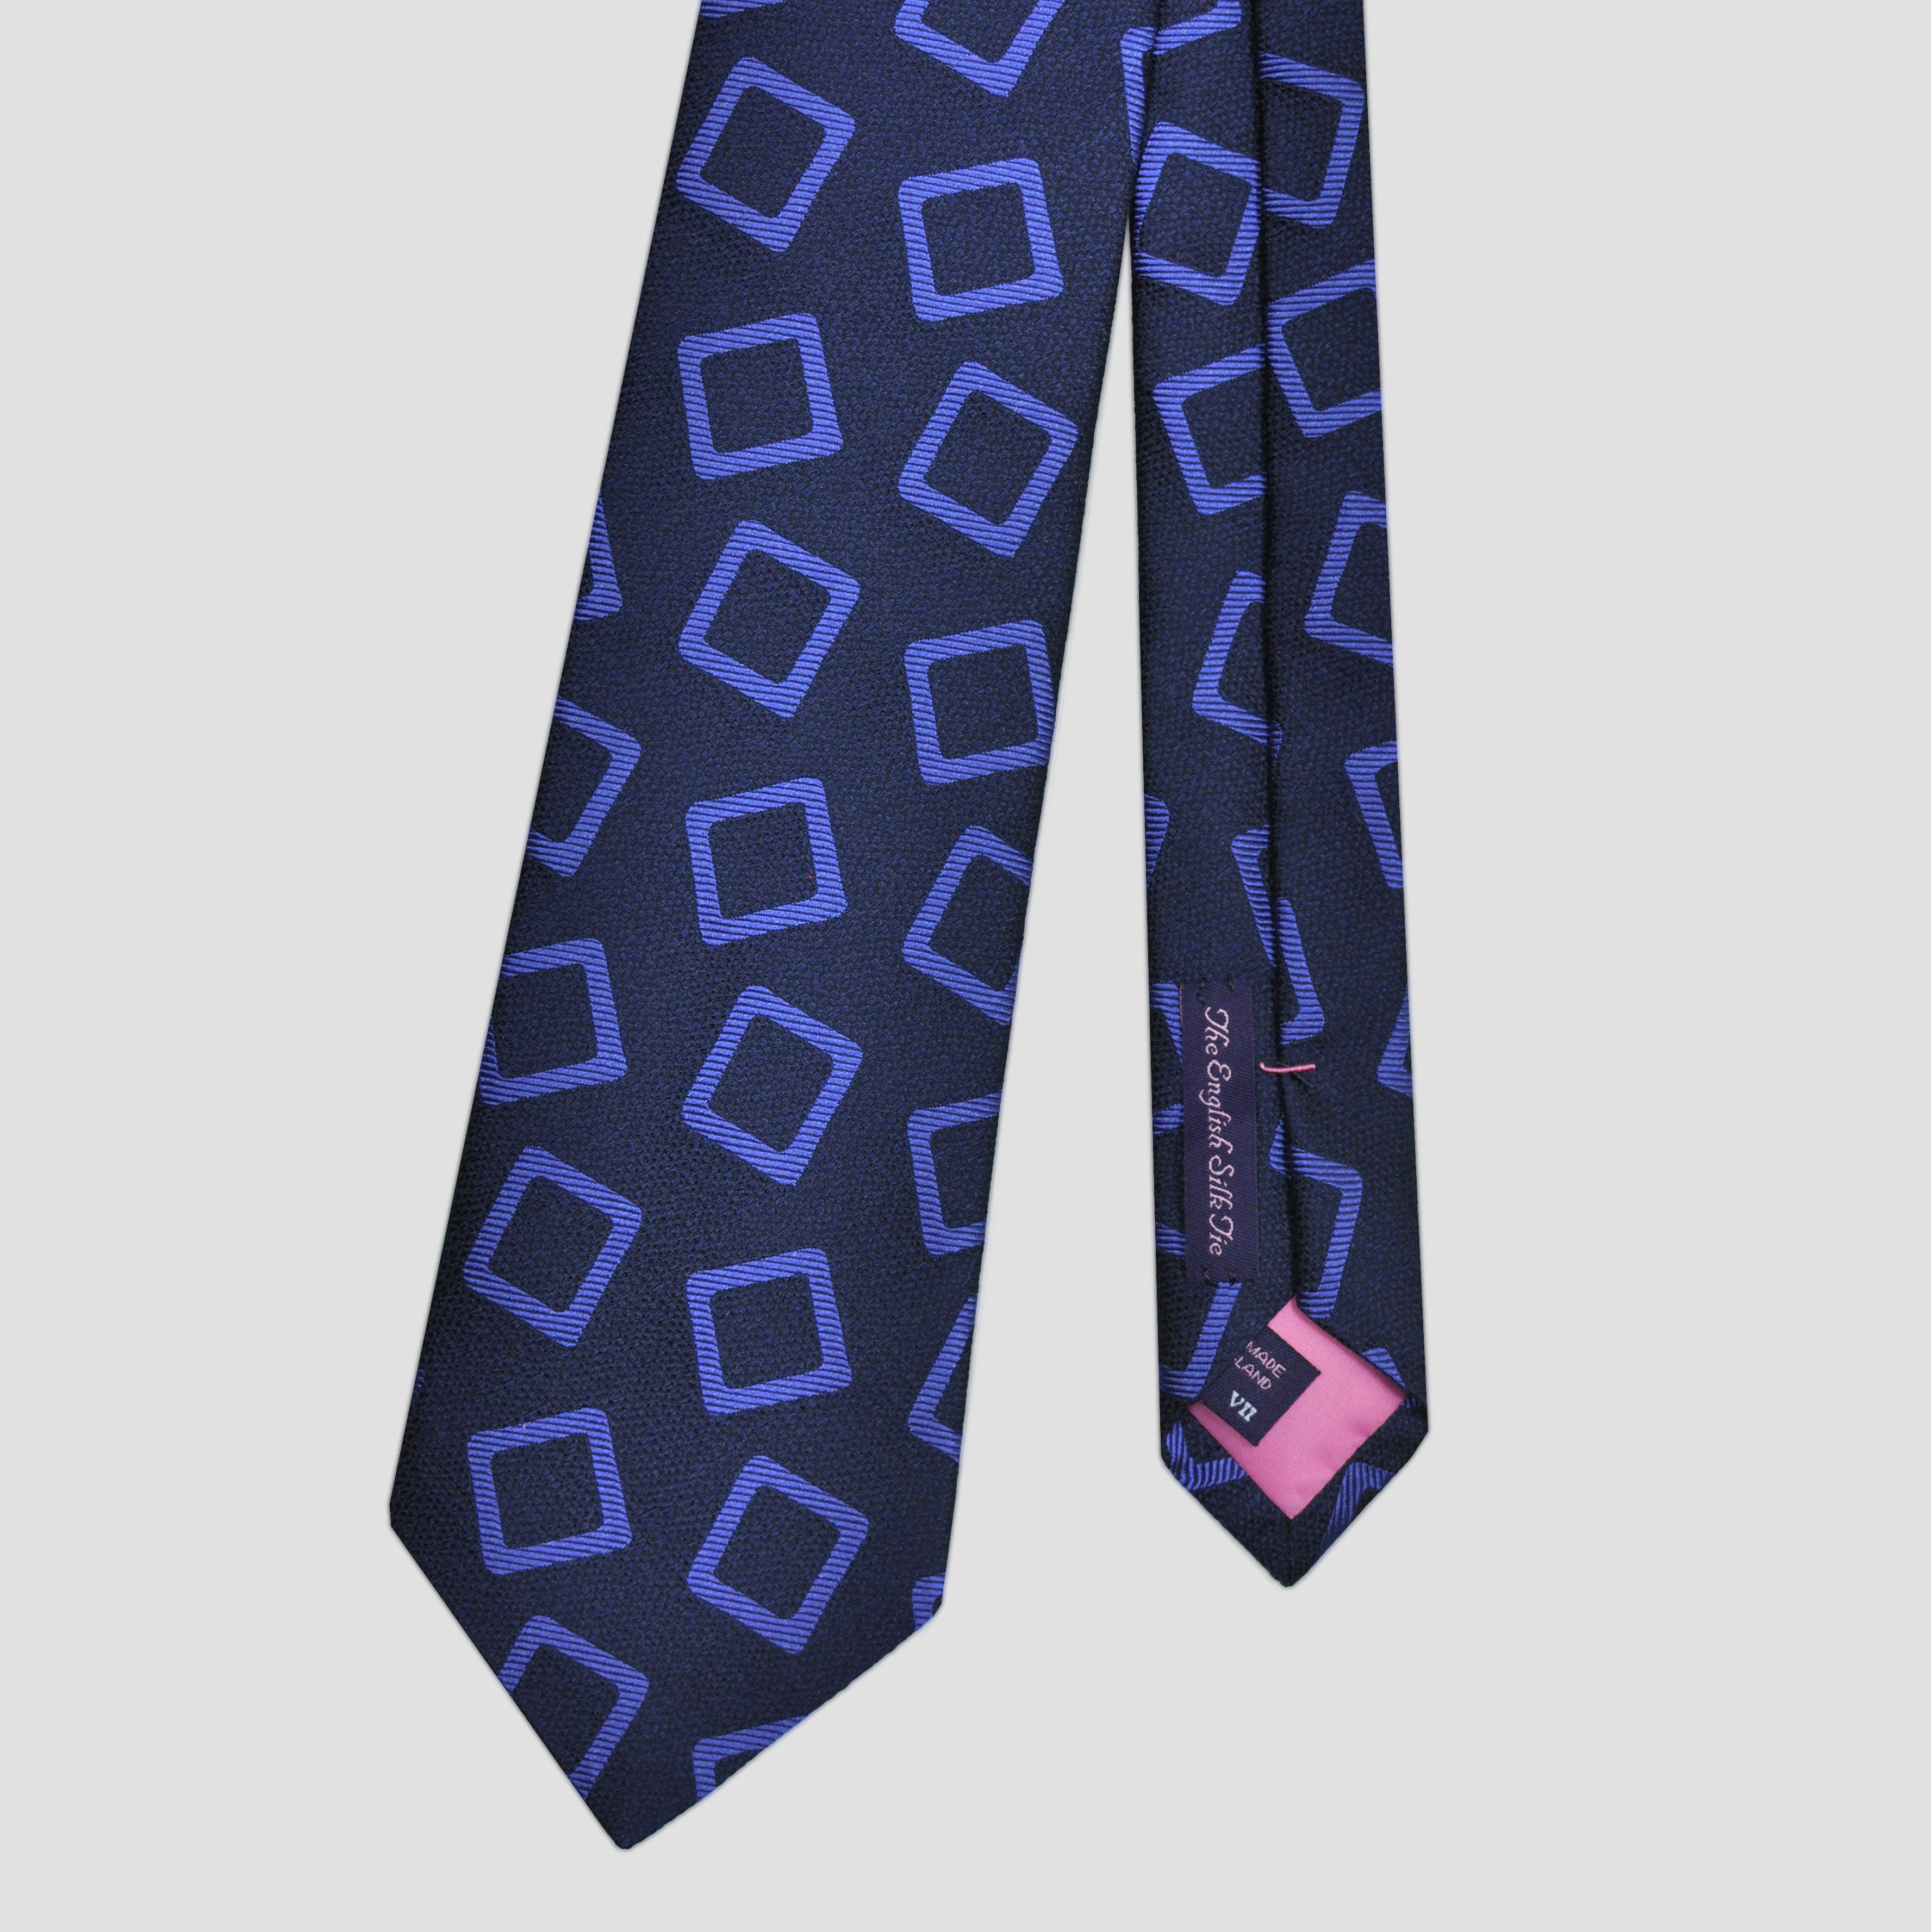 Falling Squares Woven Silk Tie in Navy & Blue